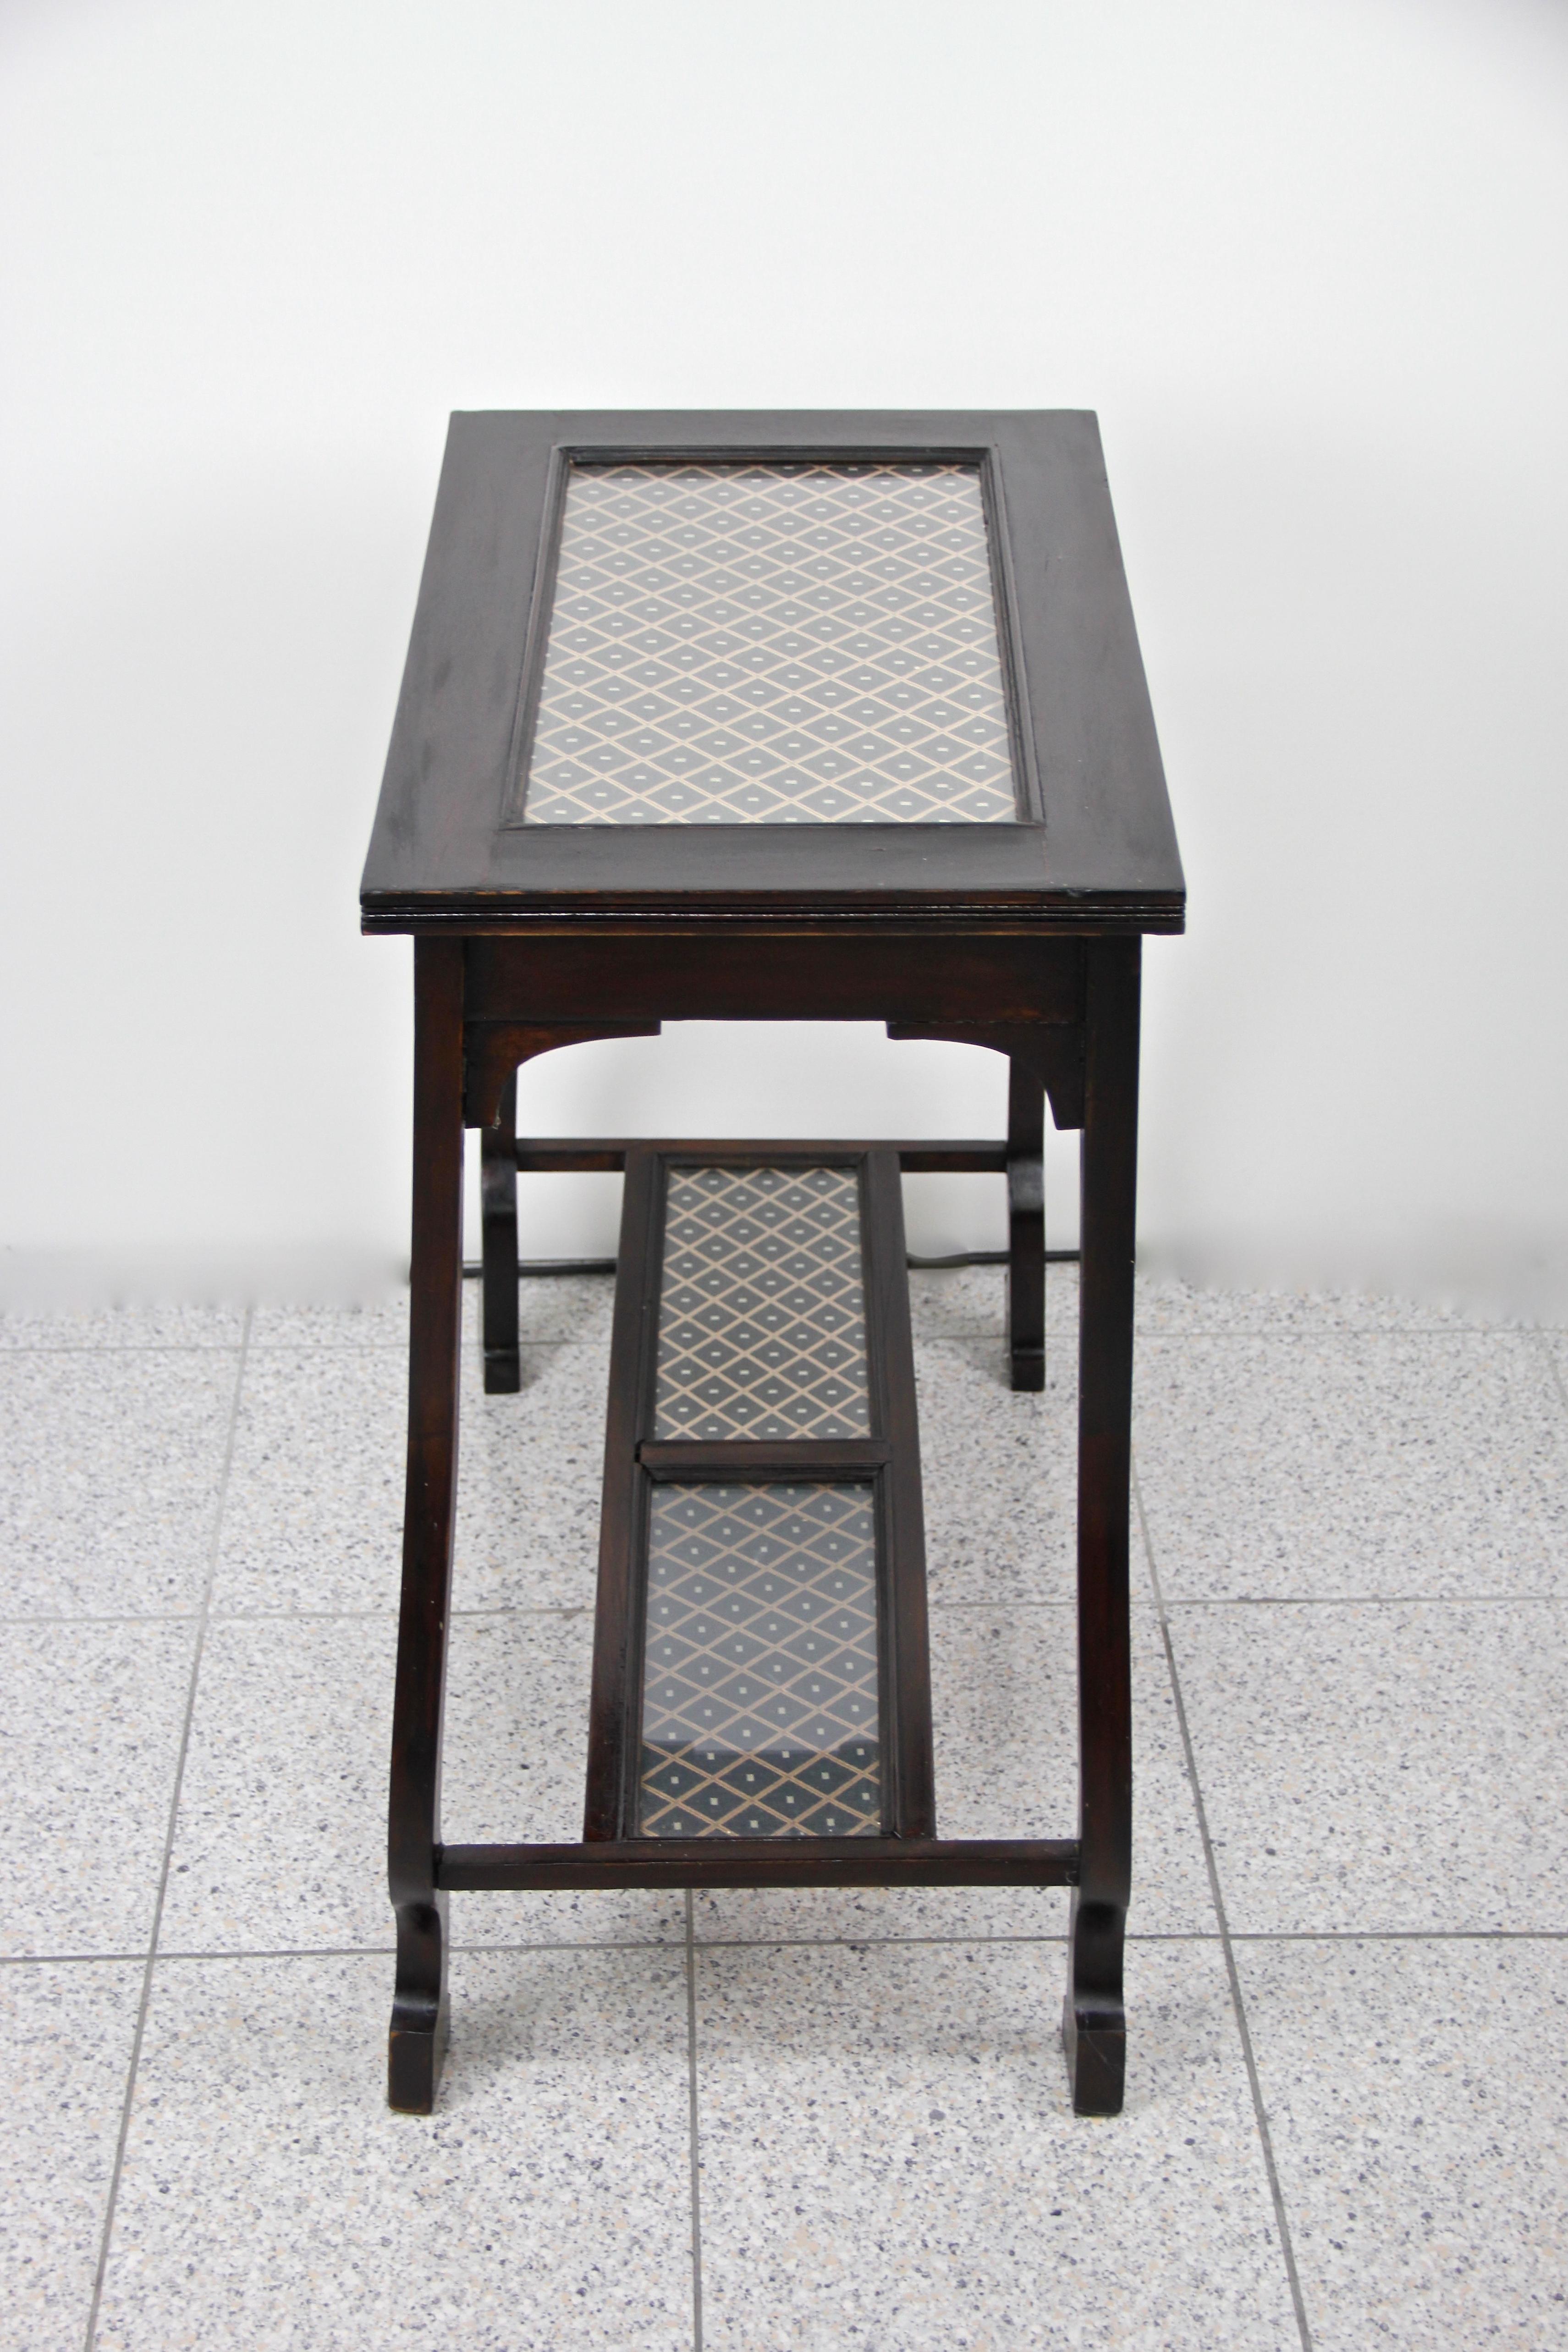 20th Century Art Nouveau Side Table with Inlayed Glassplates, Austria, circa 1910 For Sale